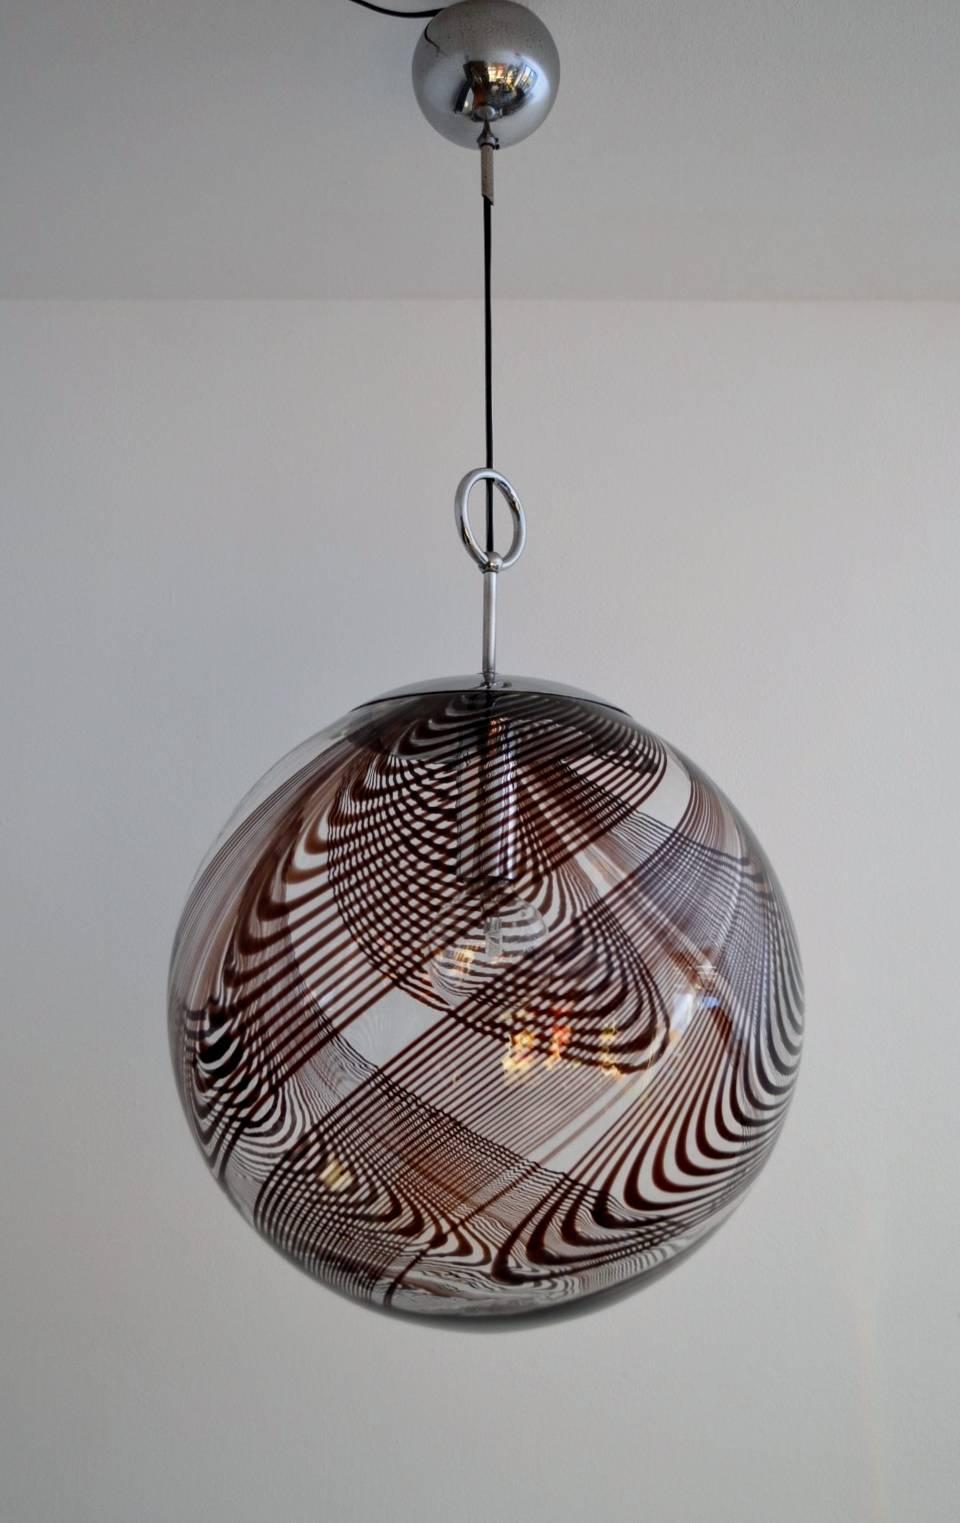 Beautiful huge glass globe with chocolate colored dark swirled smaller and larger lines around the globe, designed by Lino Tagliapietra and manufactured from La Murrina, 1960s.
Amazing artistic work, which leaves a beautiful pattern to the wall when